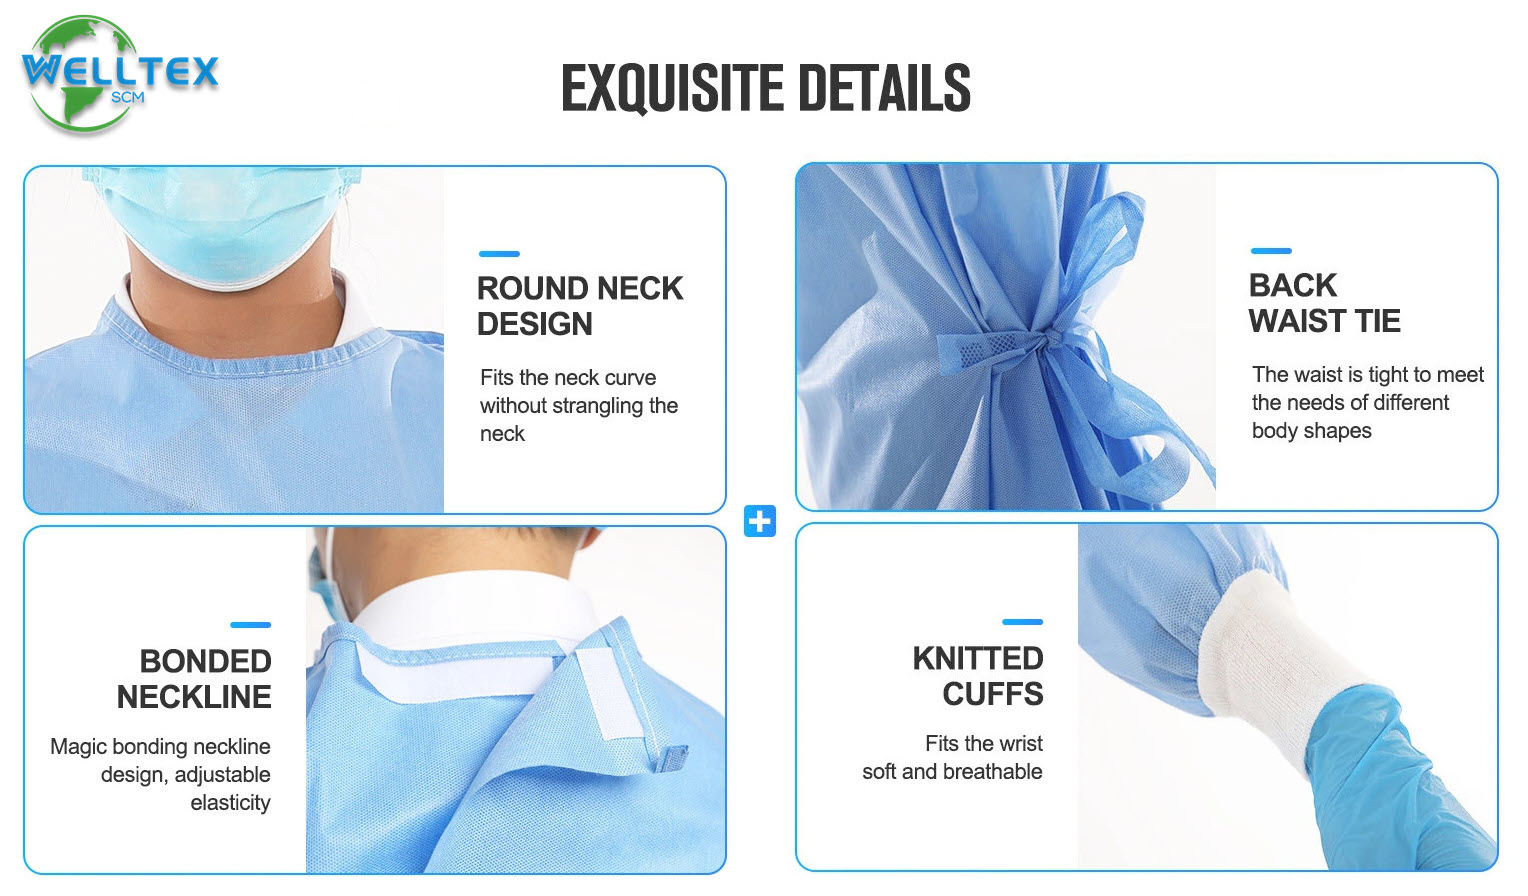 Disposable Isolation Gowns waterproof Breathable AAMI 2 disposable gowns medical isolation gowns